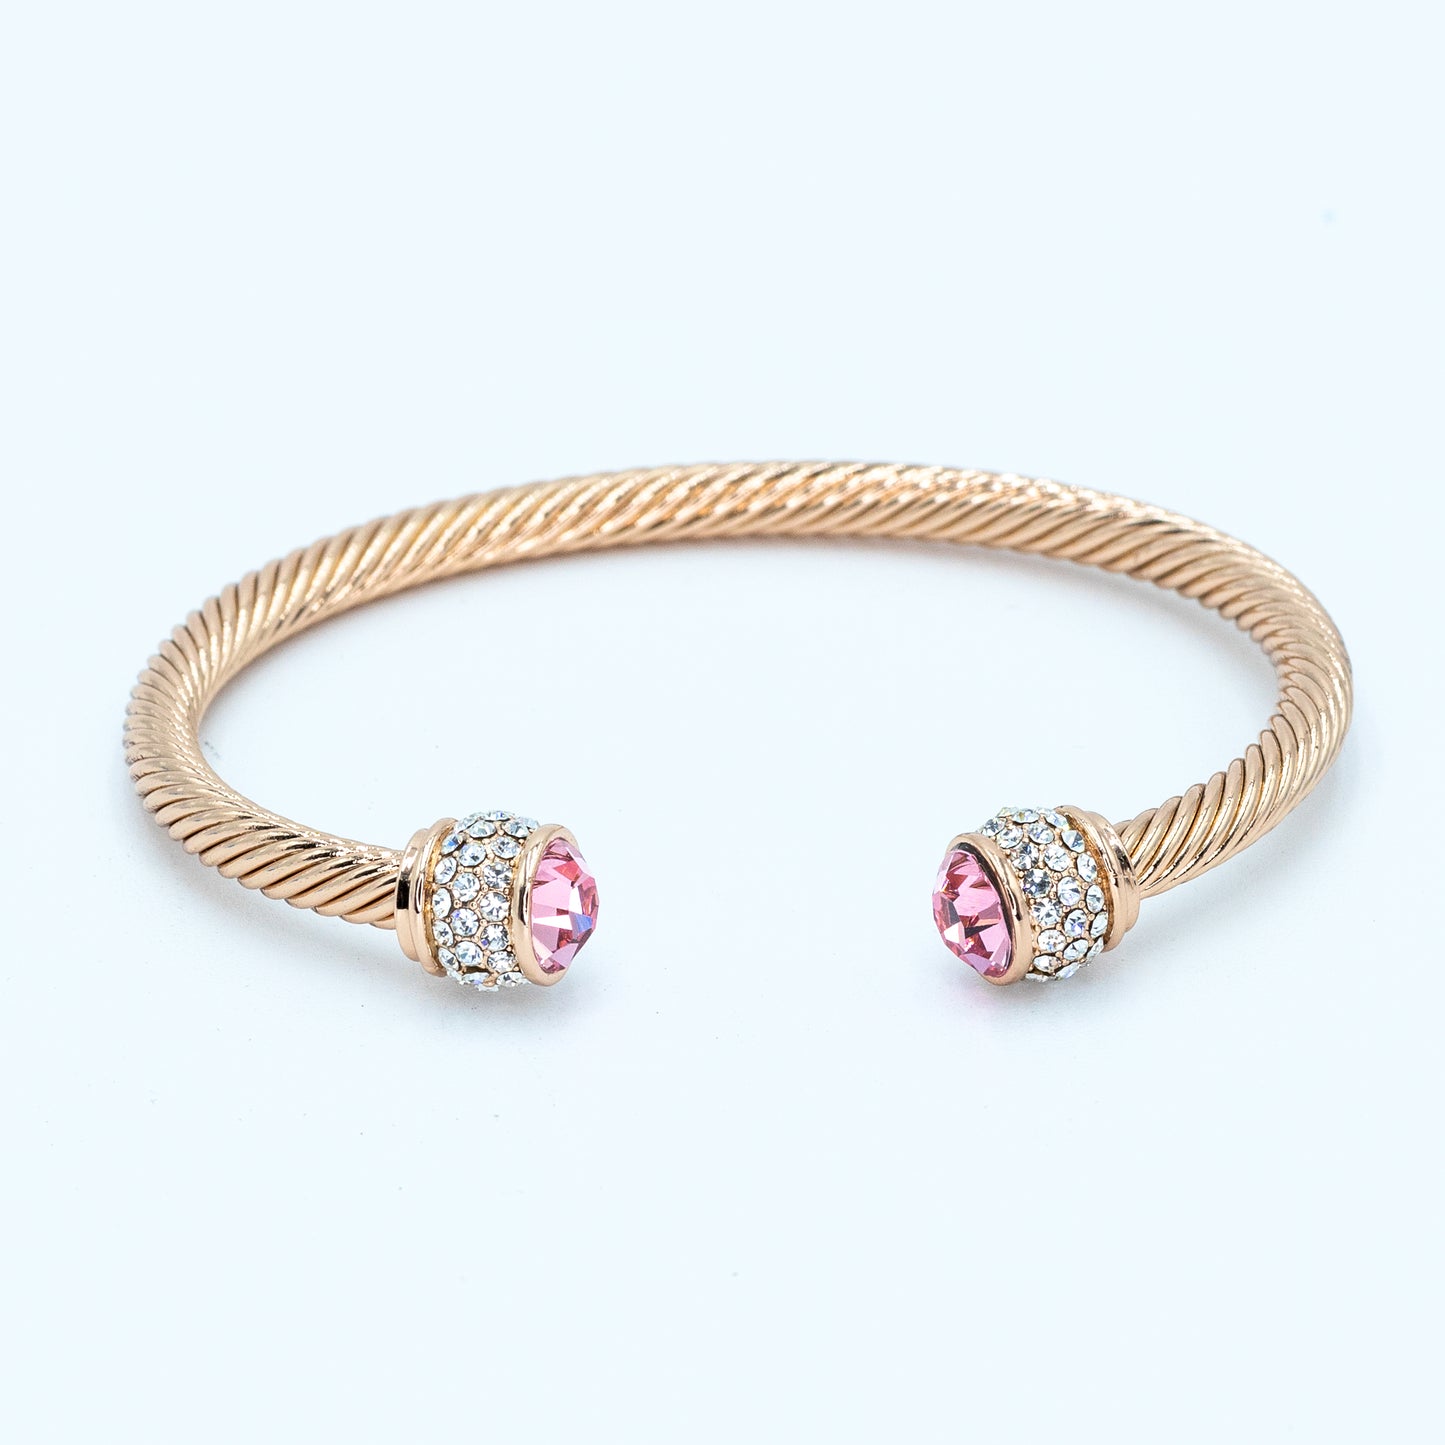 Rosegold plated bangle w/ CZ stones and pink stone Default Title